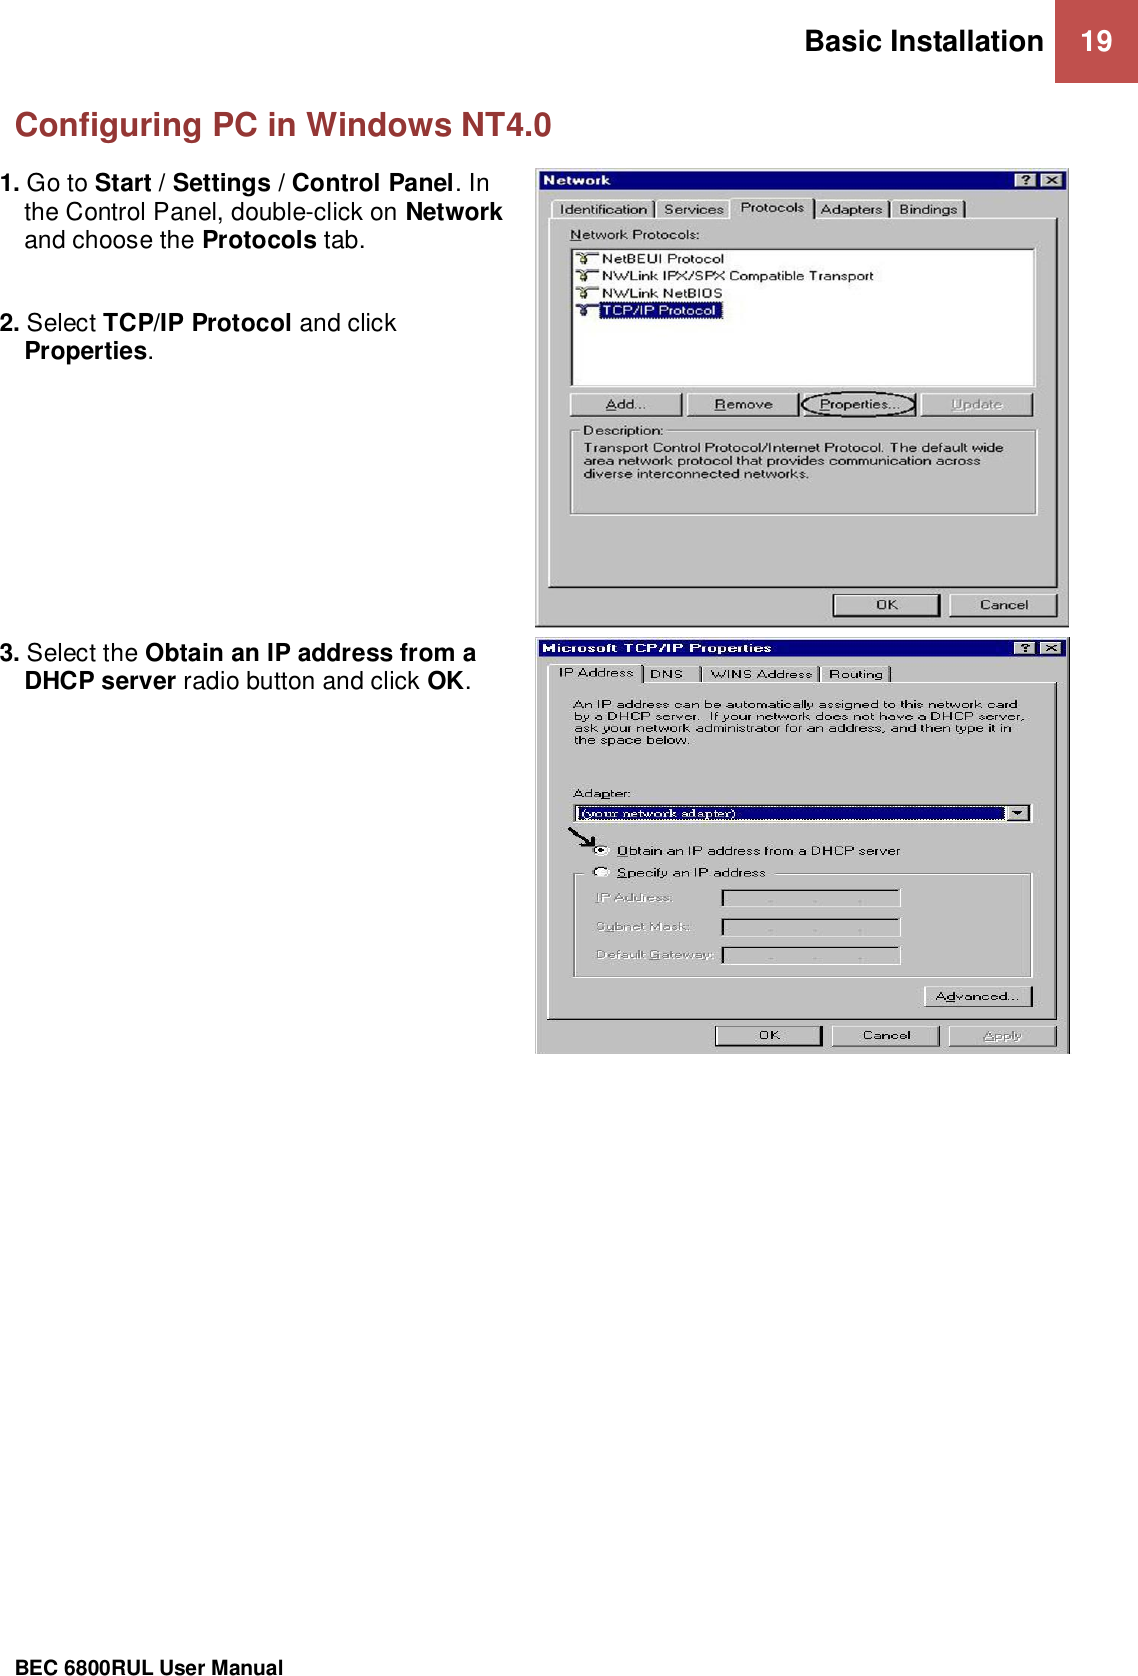 Basic Installation 19                                                 BEC 6800RUL User Manual  Configuring PC in Windows NT4.0 1. Go to Start / Settings / Control Panel. In the Control Panel, double-click on Network and choose the Protocols tab.  2. Select TCP/IP Protocol and click Properties.   3. Select the Obtain an IP address from a DHCP server radio button and click OK.     